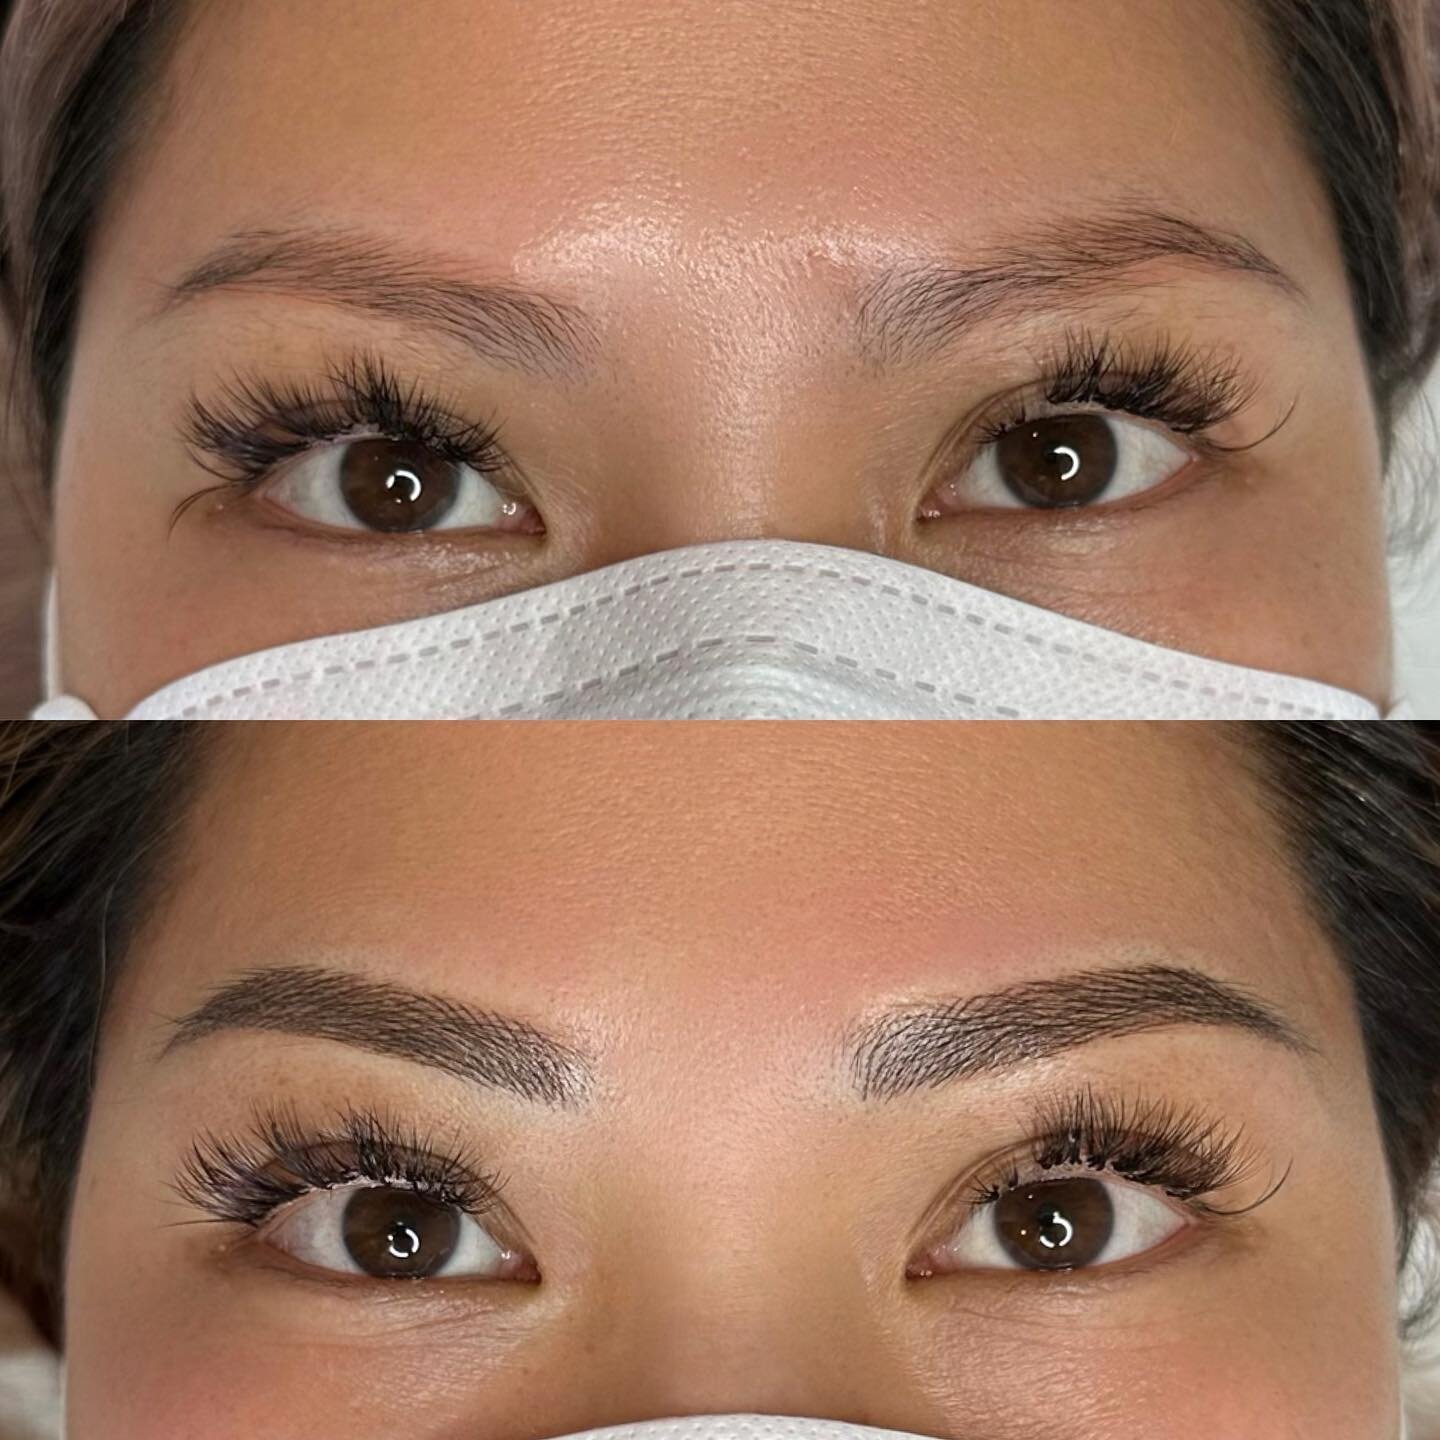 A lot of color correction recently from previously microbladed brows. I am able to color correct and cover up the old tattoo if the old tattoo is faded and not too dark. Not sure if you can get nano feathering? Send me some photos of your brows! 🤗📩